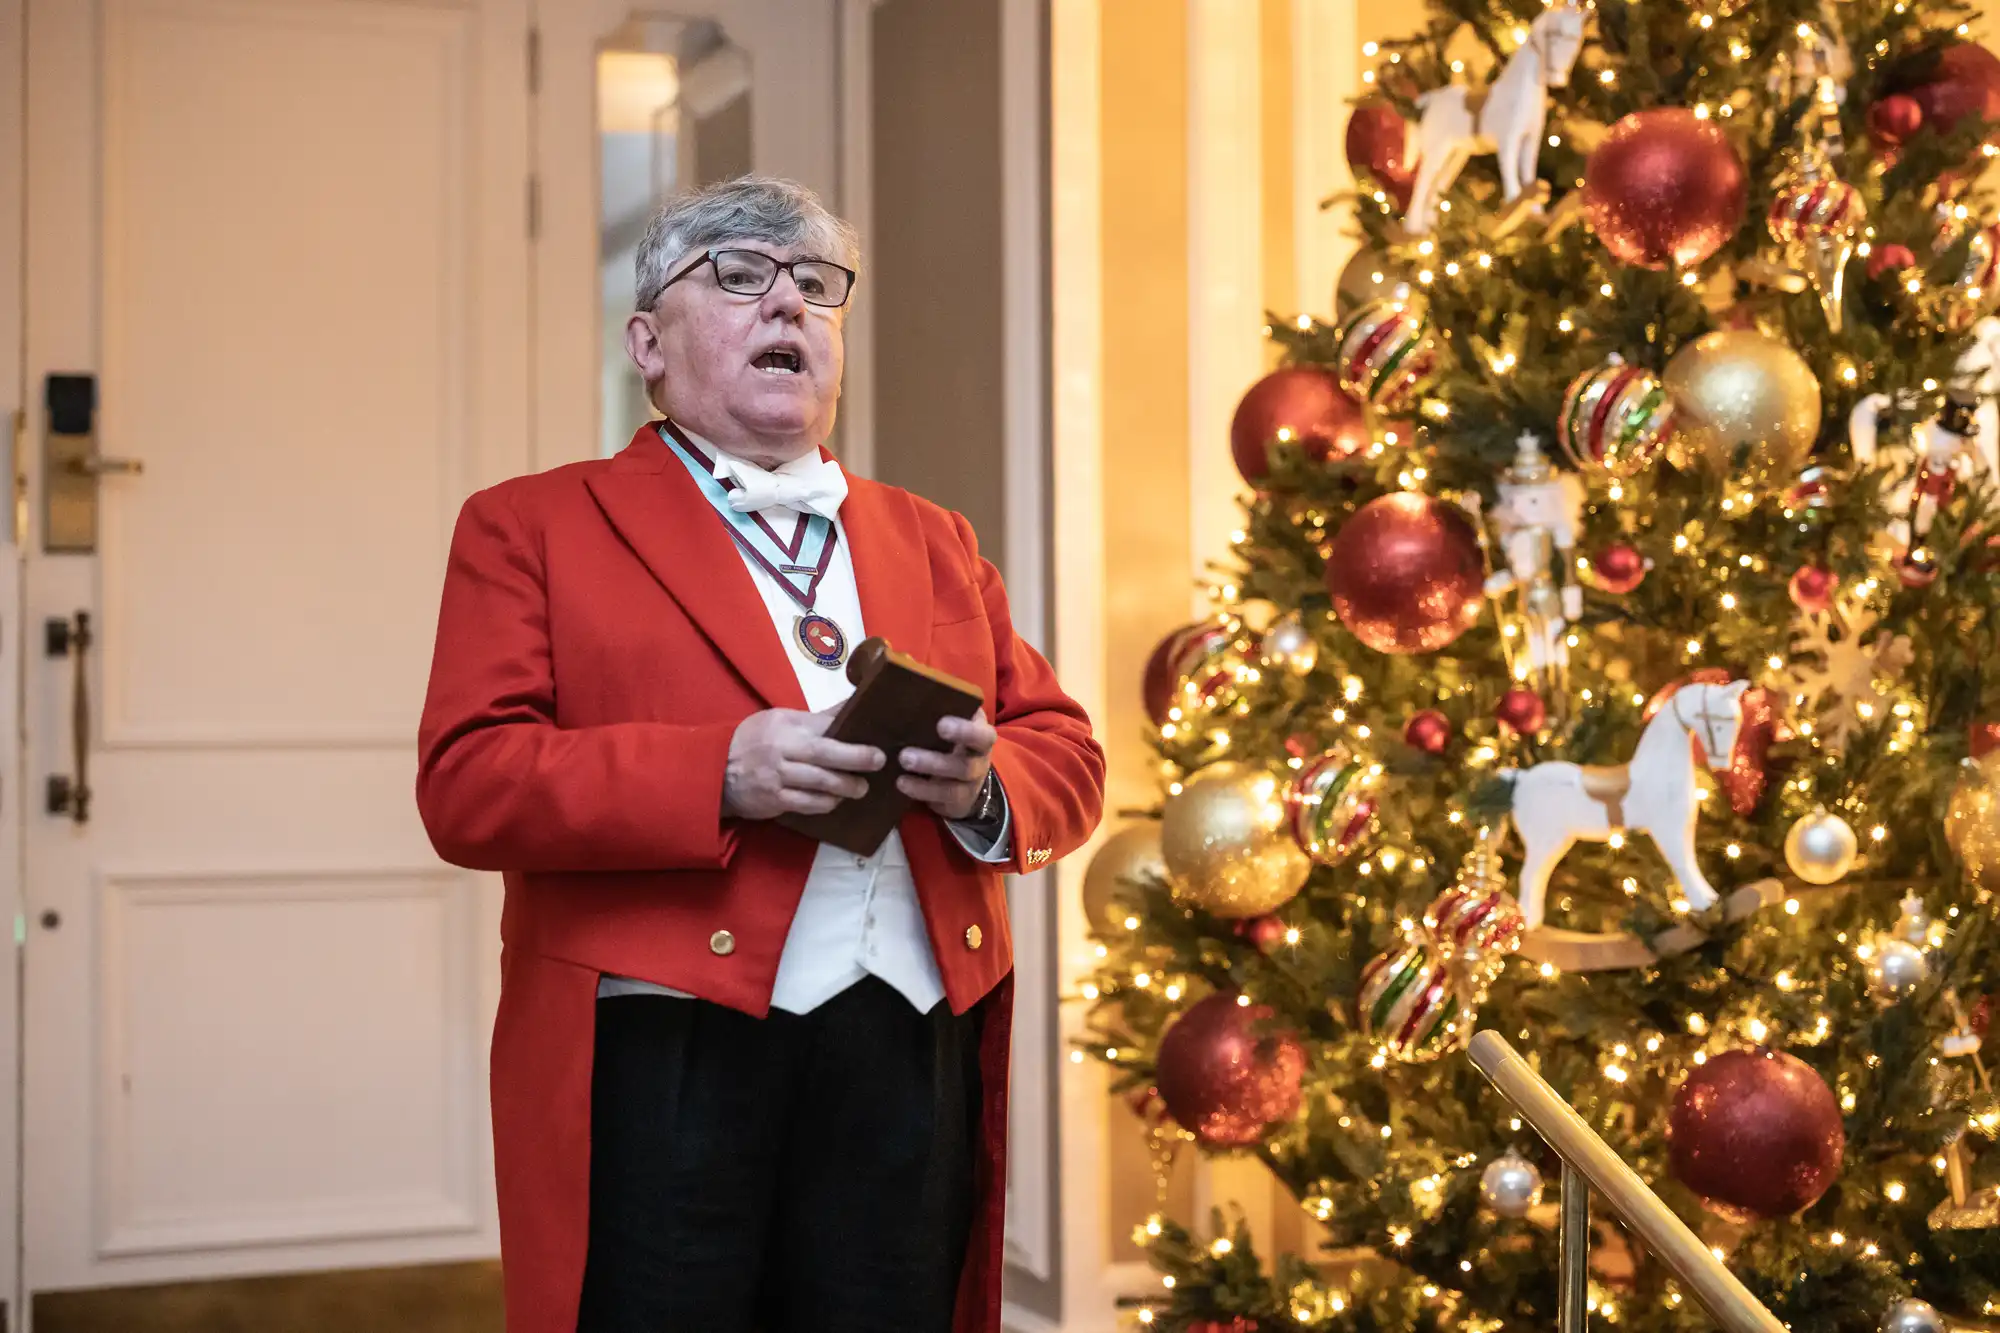 An elderly man in a red coat speaks while standing next to a Christmas tree decorated with lights, ornaments, and toy horse figures.